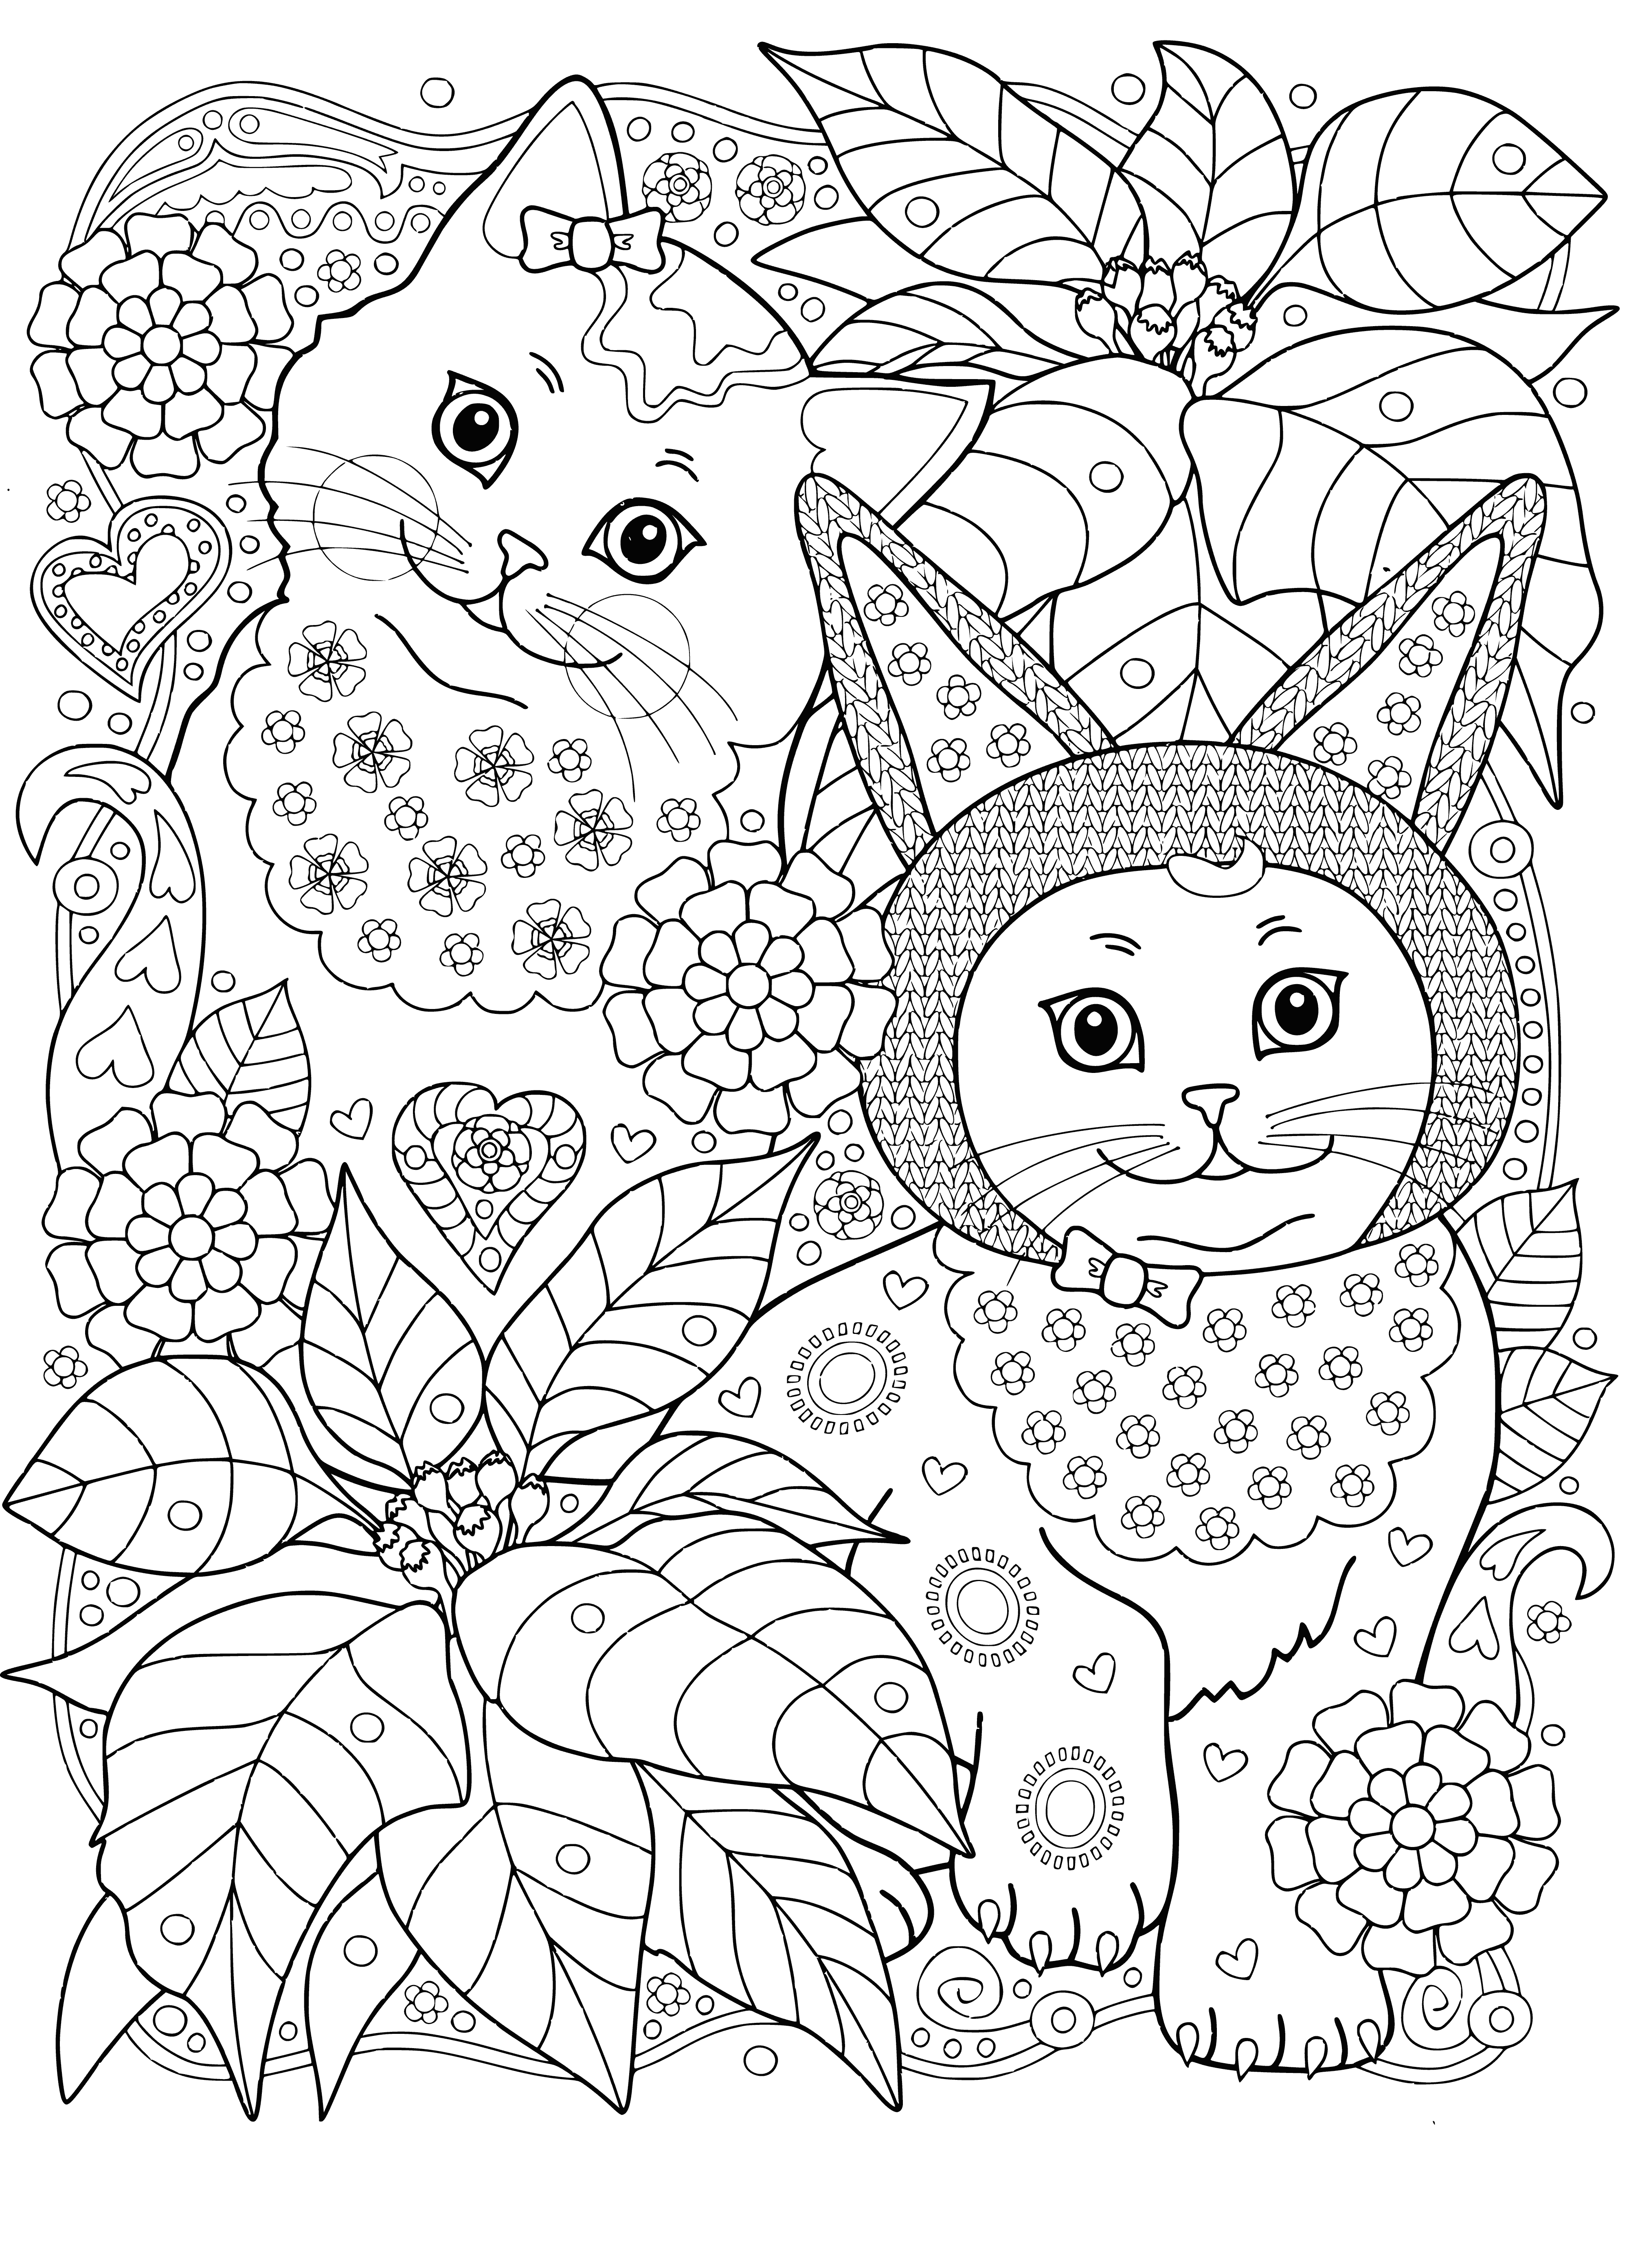 coloring page: 2 cats in the garden: gray/white & black/white. Gray and white is looking at the other, which has its back turned.